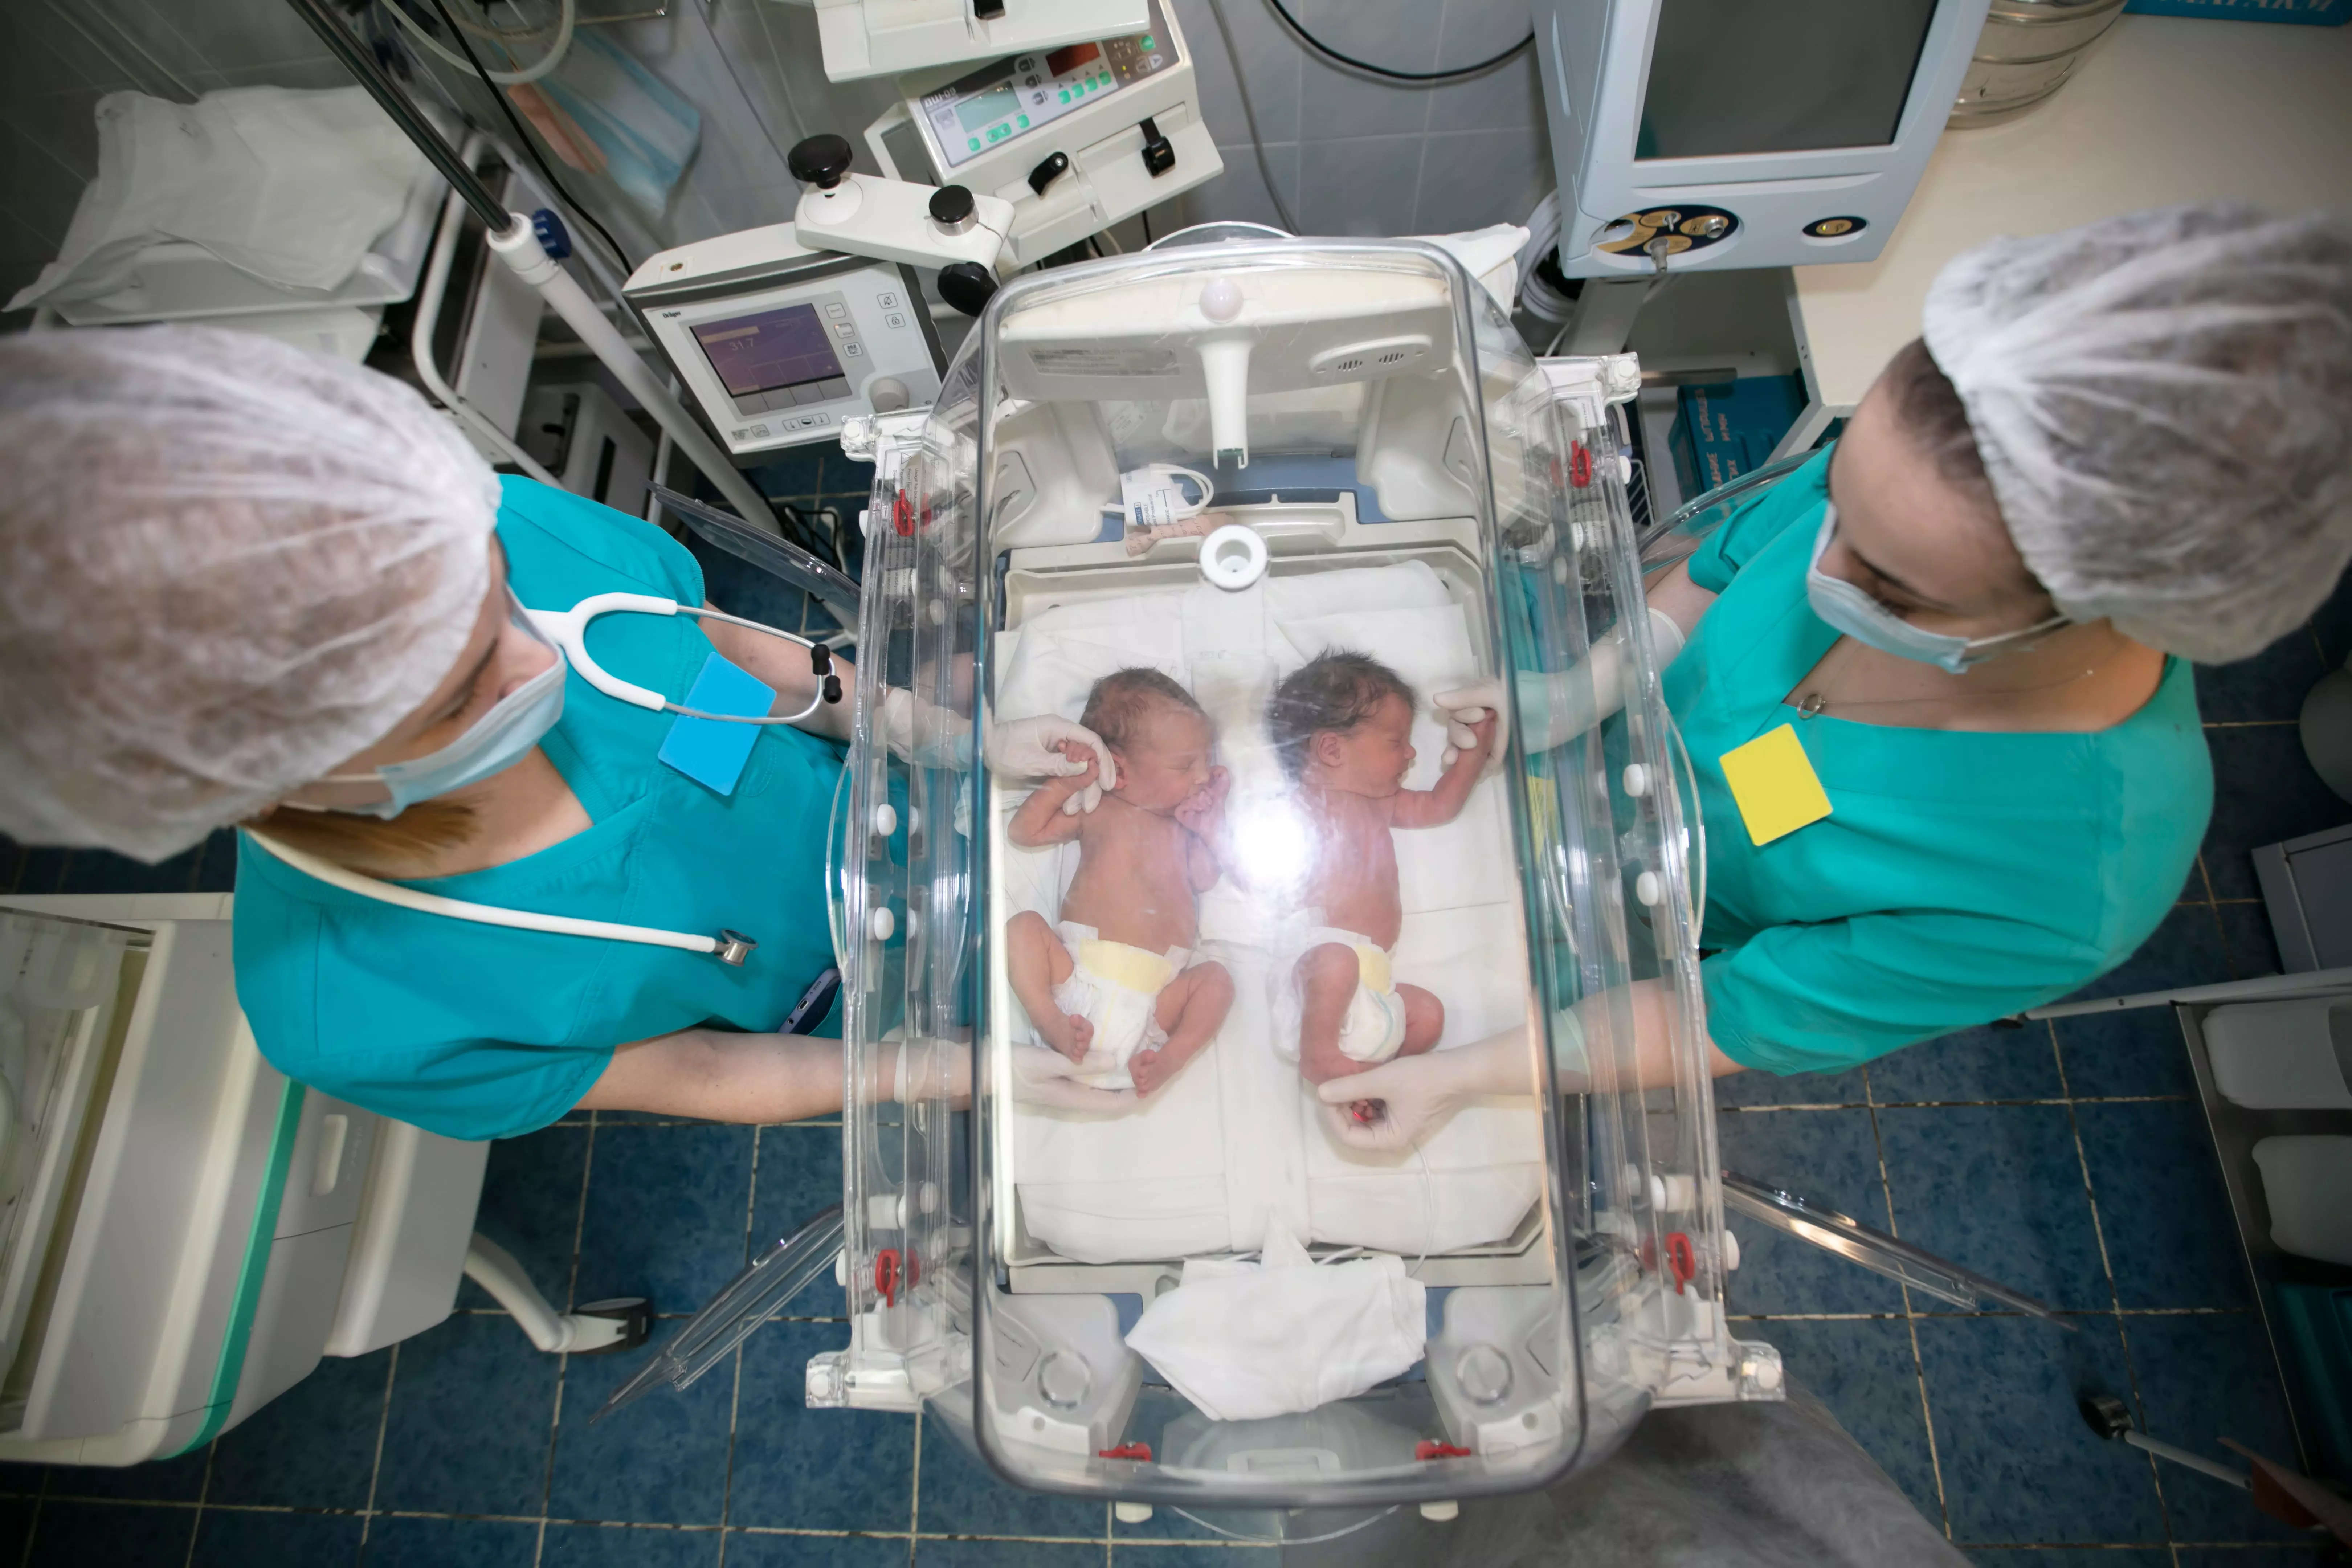 A 70 Year Old Woman In Uganda Gave Birth To Twins She Conceived Via Ivf Business Insider India 